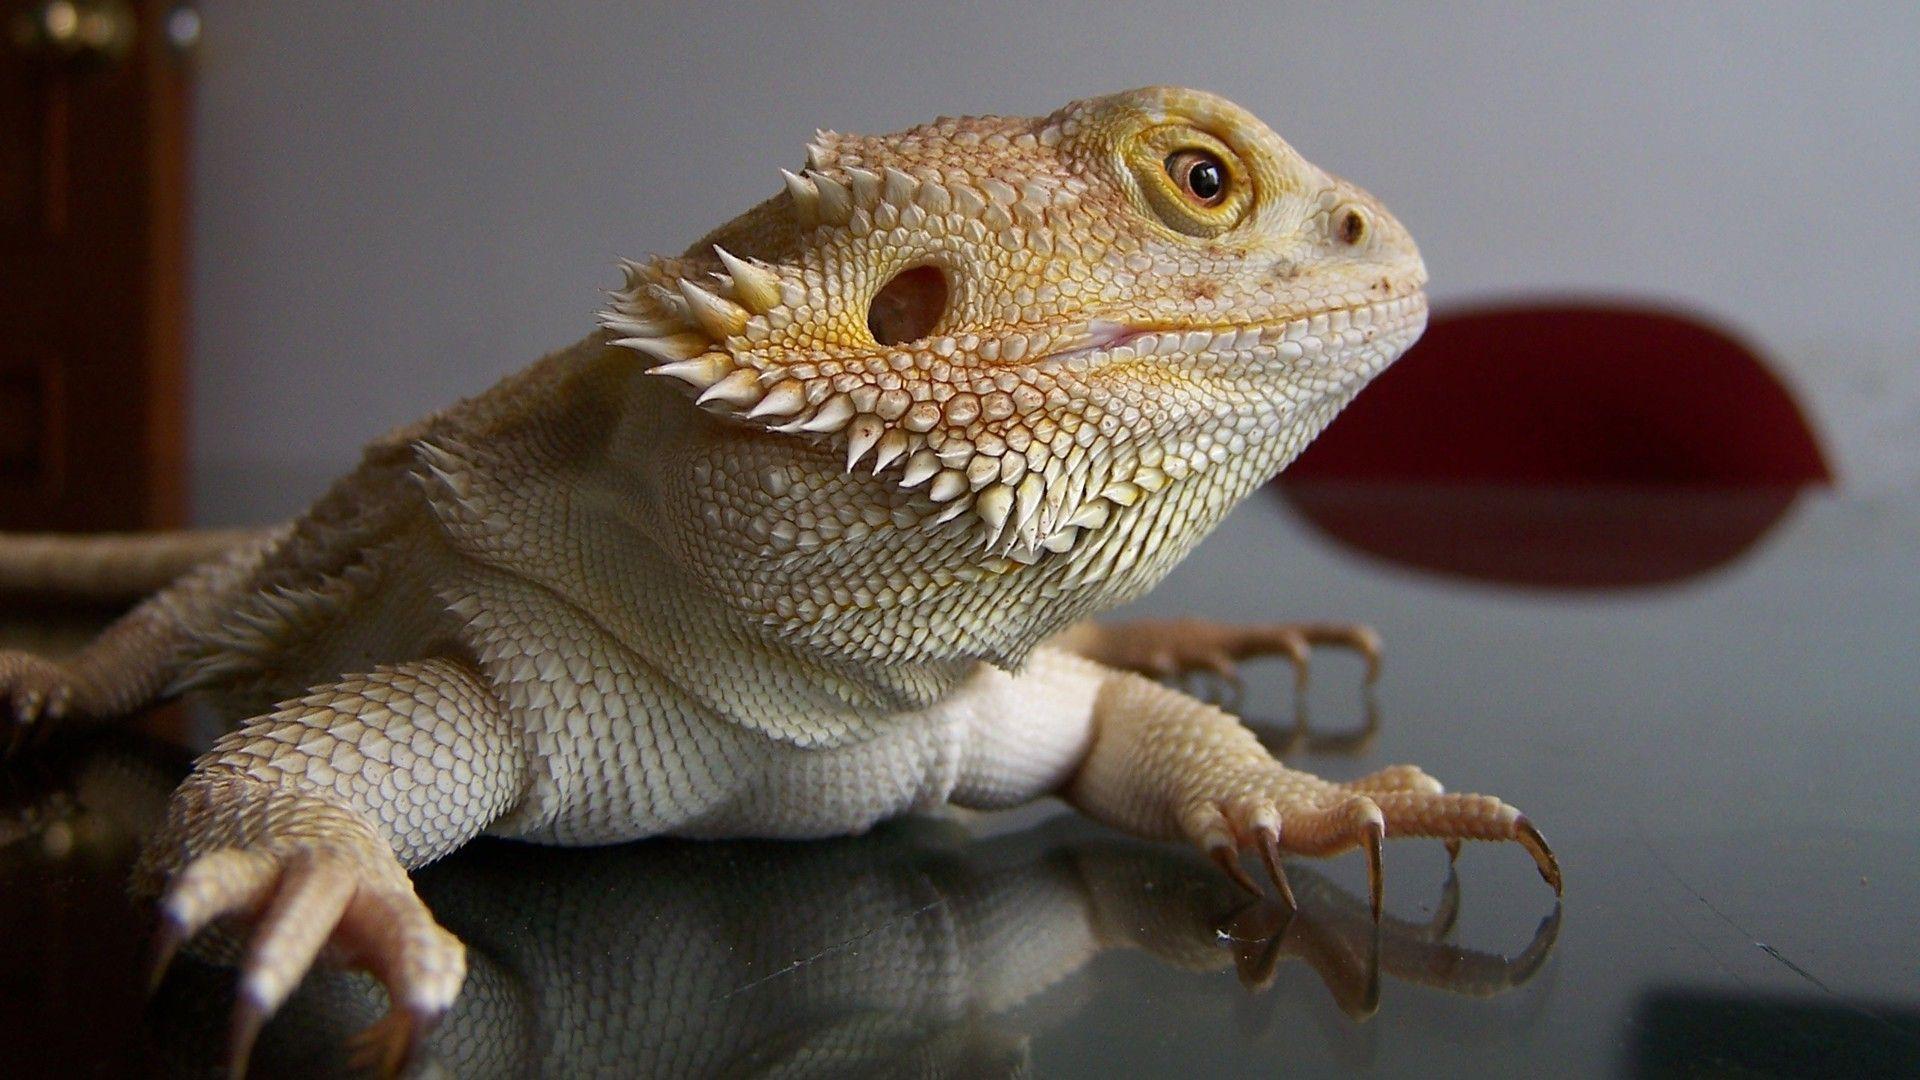 Bearded Dragon Photos Download The BEST Free Bearded Dragon Stock Photos   HD Images